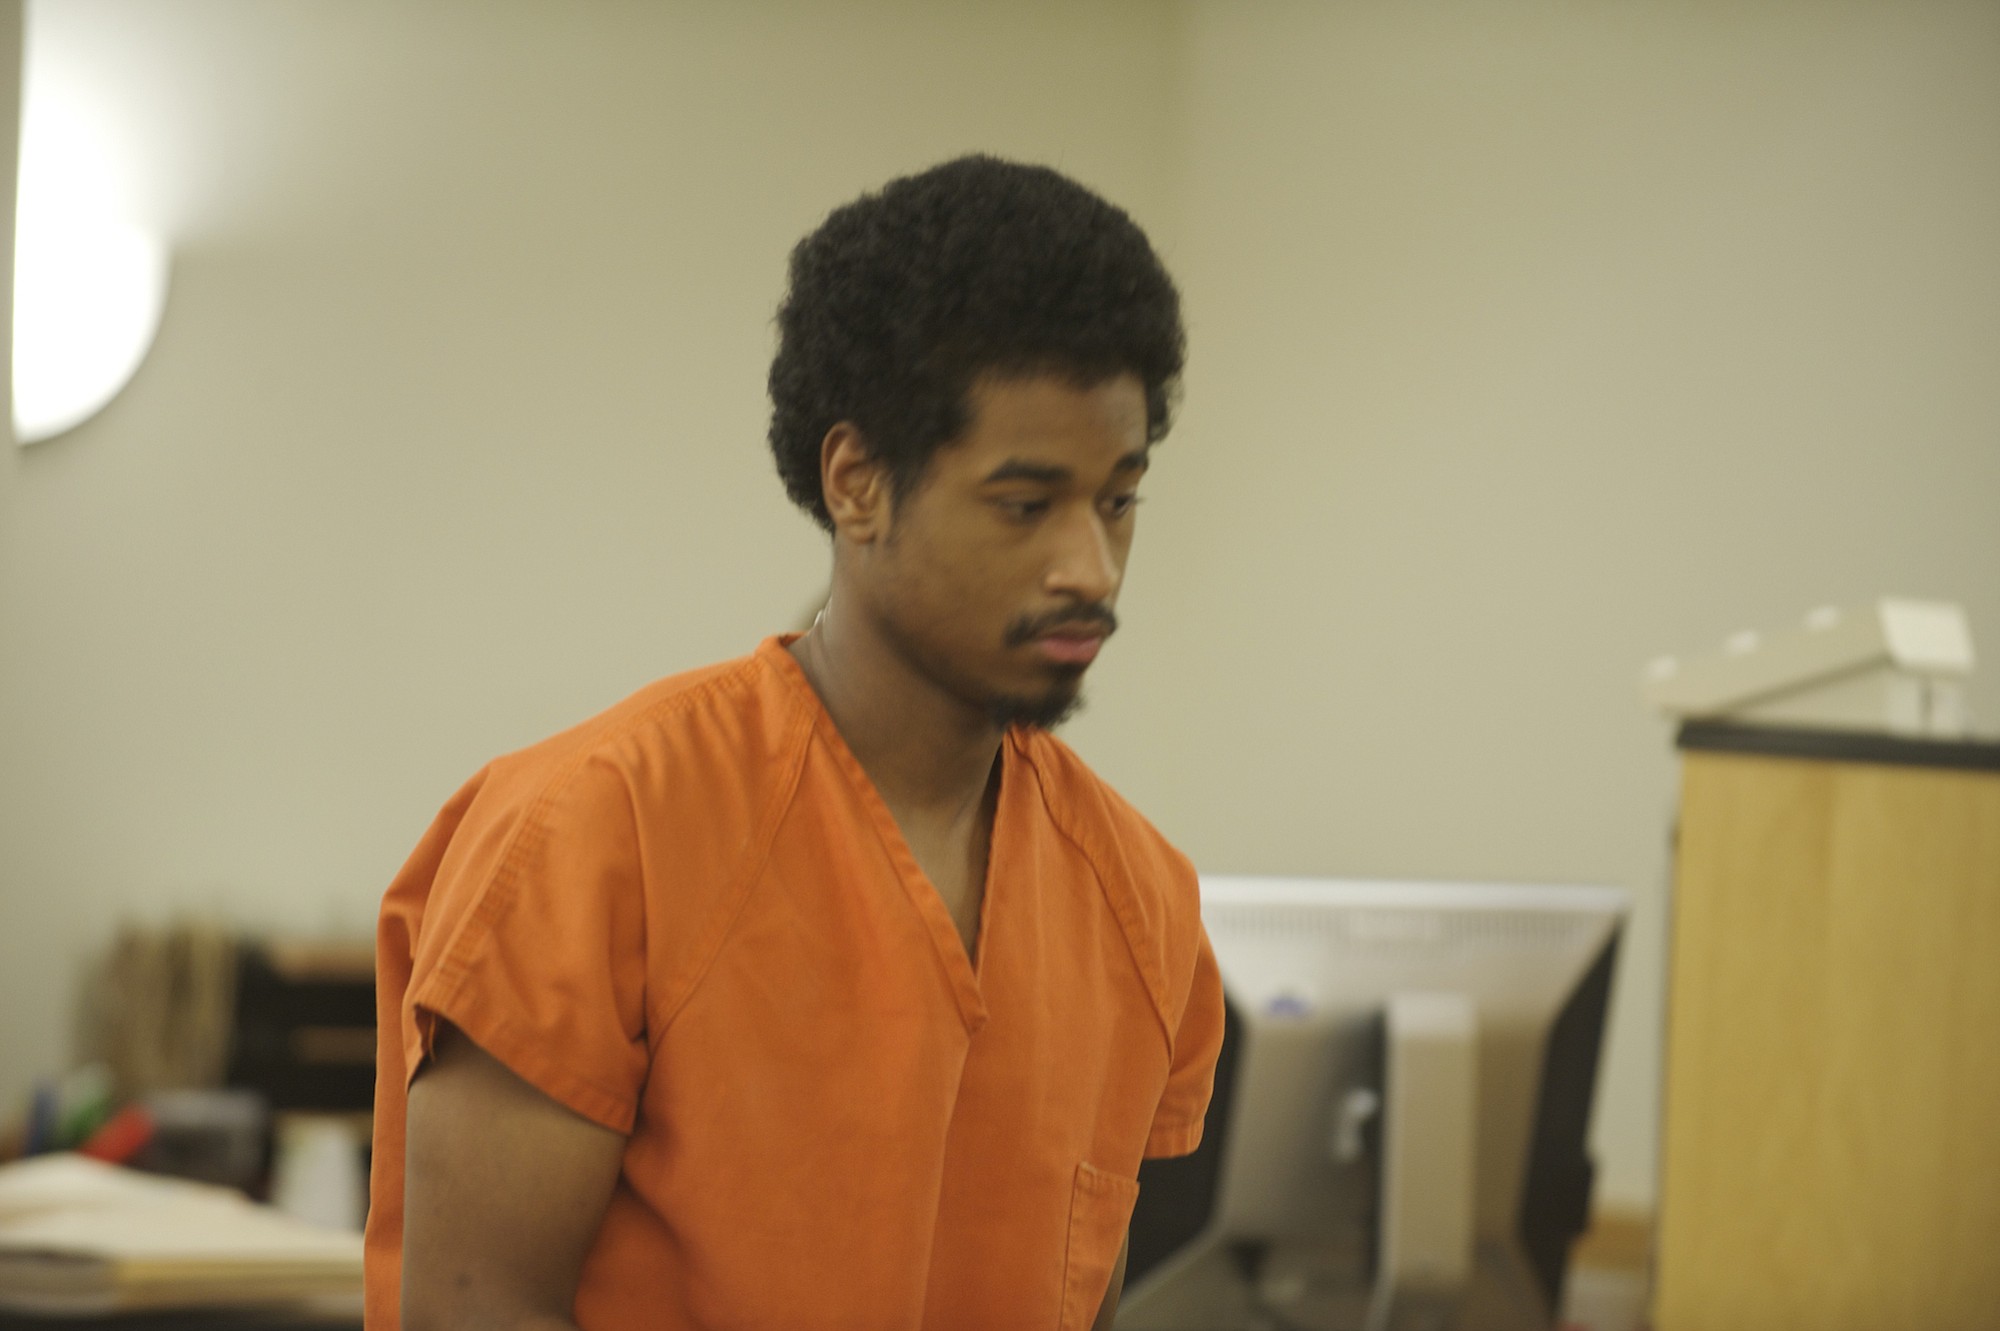 Brandon Duckworth makes his first appearance in Clark County Superior Court on Wednesday on charges stemming from an alleged drive-by shooting in January.